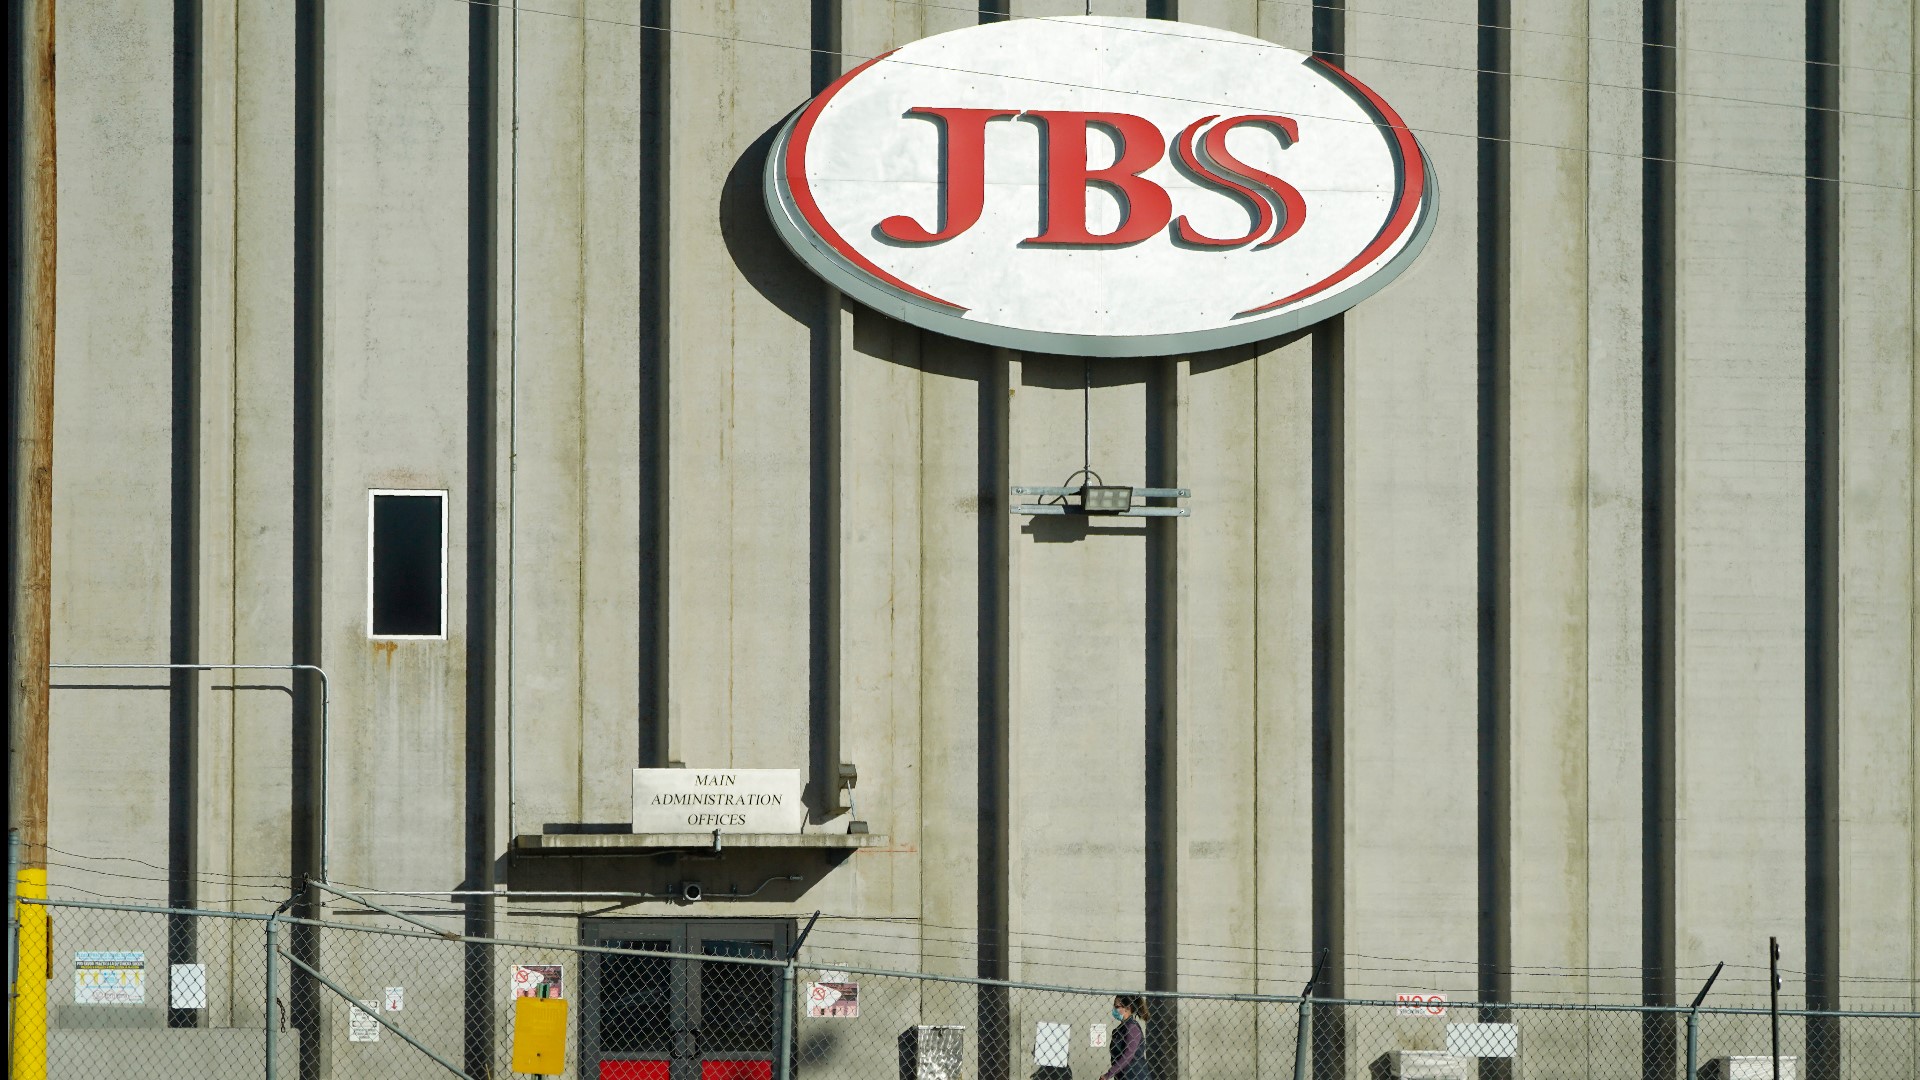 JBS is the second-largest producer of beef, pork and chicken in the U.S.